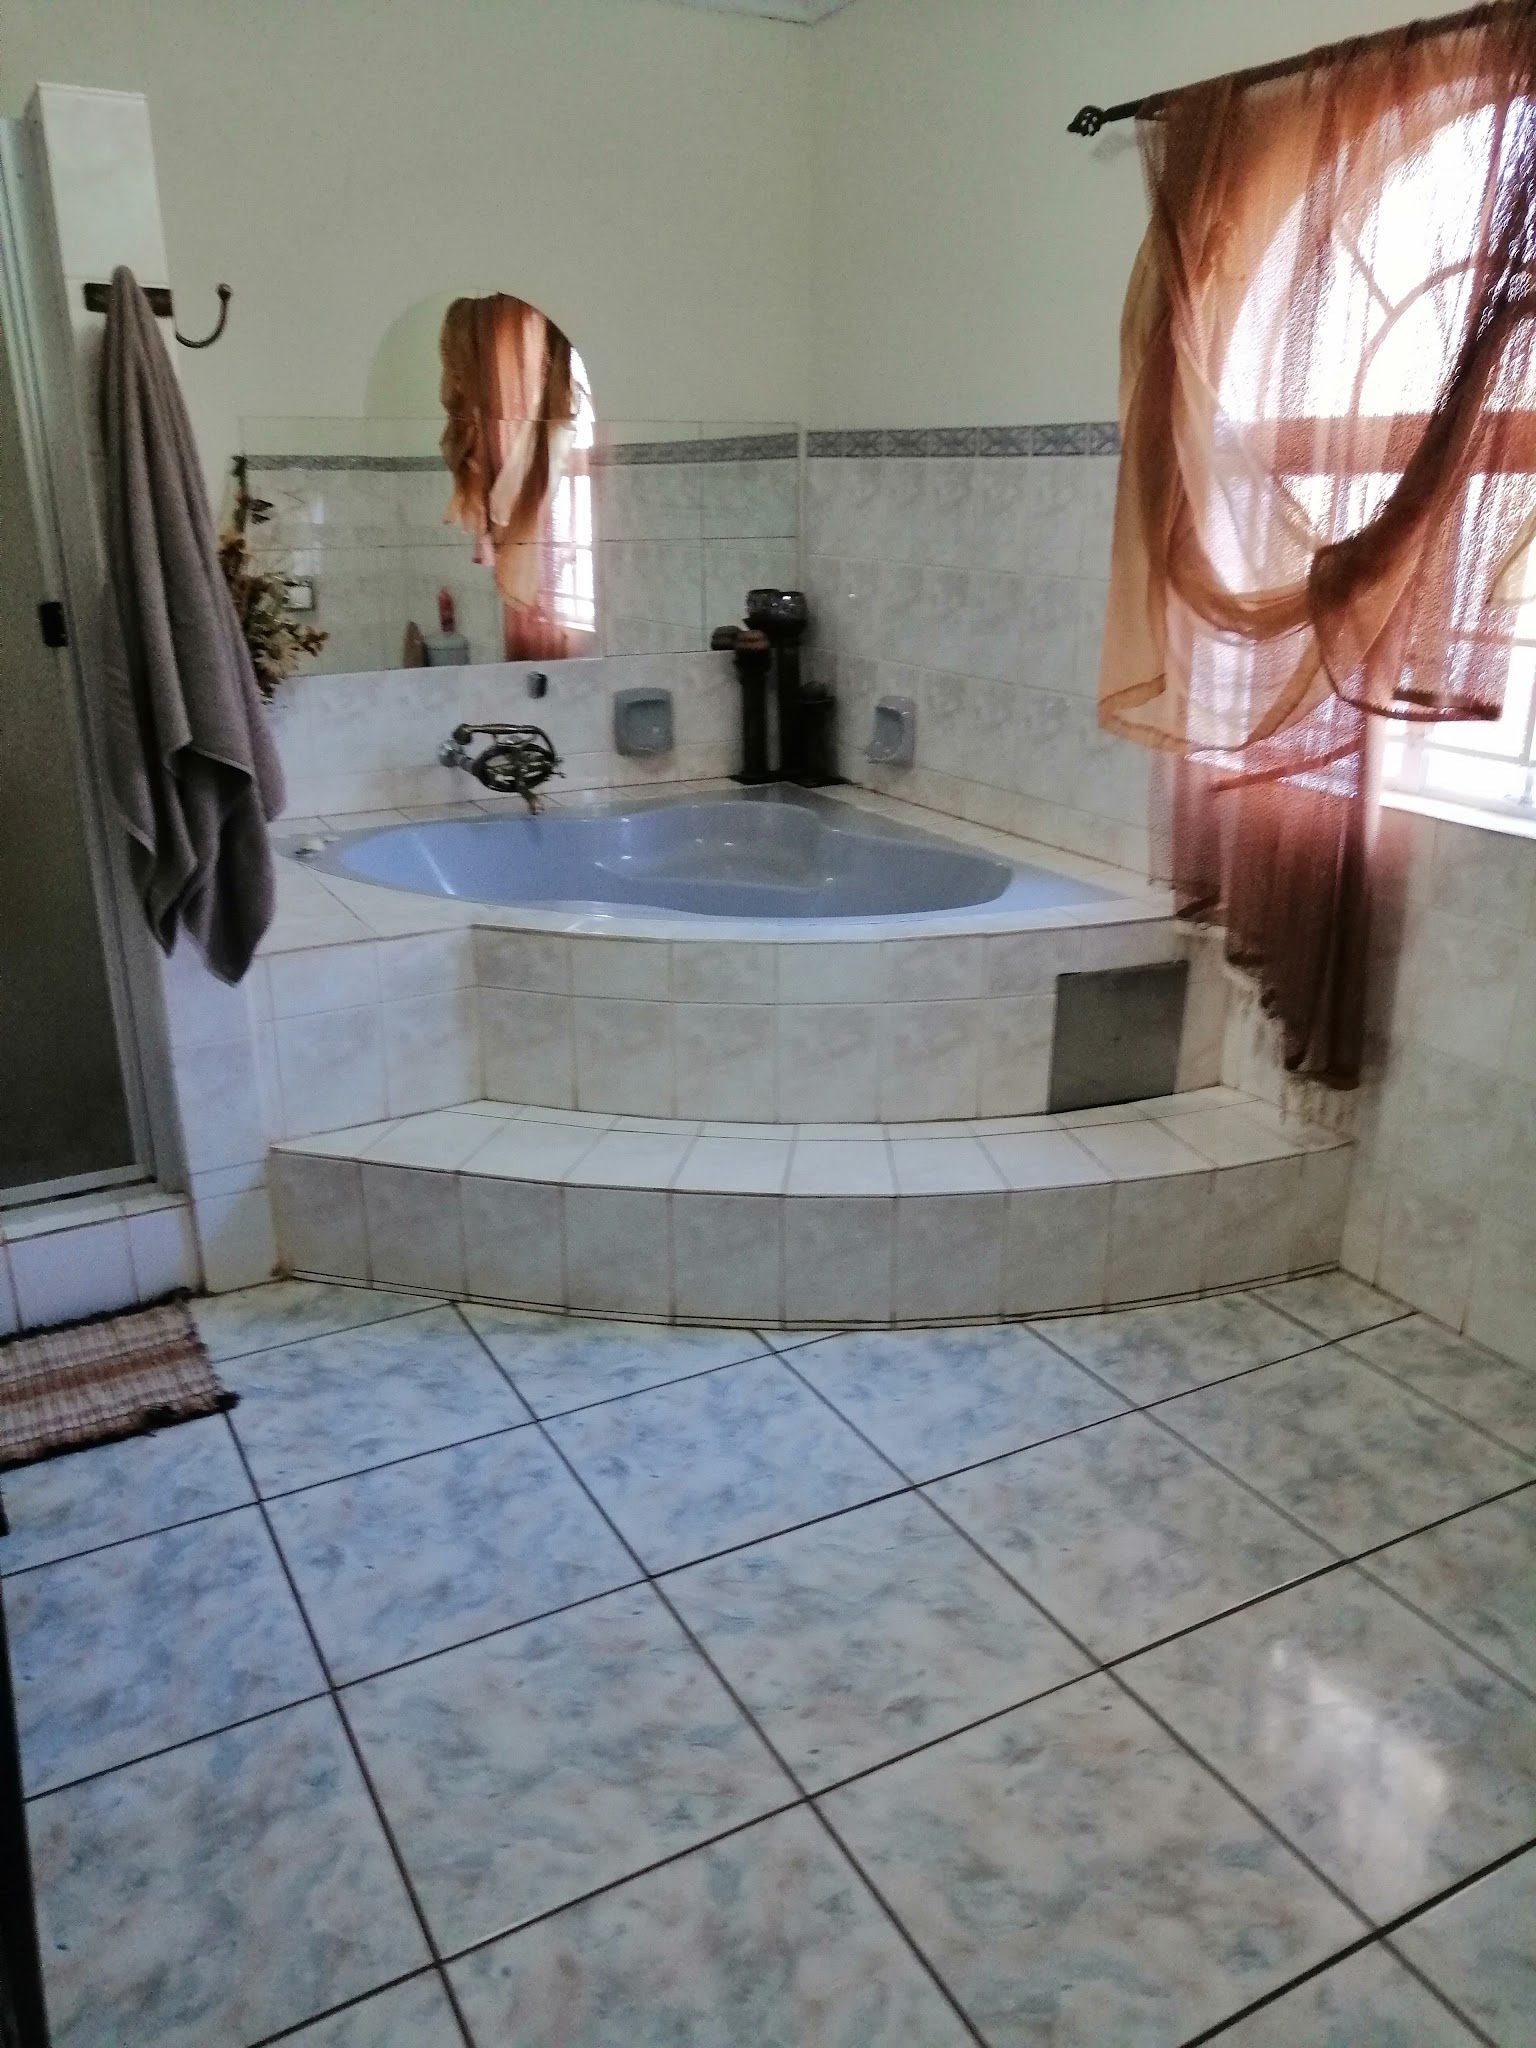 Villa Toscana Guest House Thabazimbi Limpopo Province South Africa Bathroom, Swimming Pool